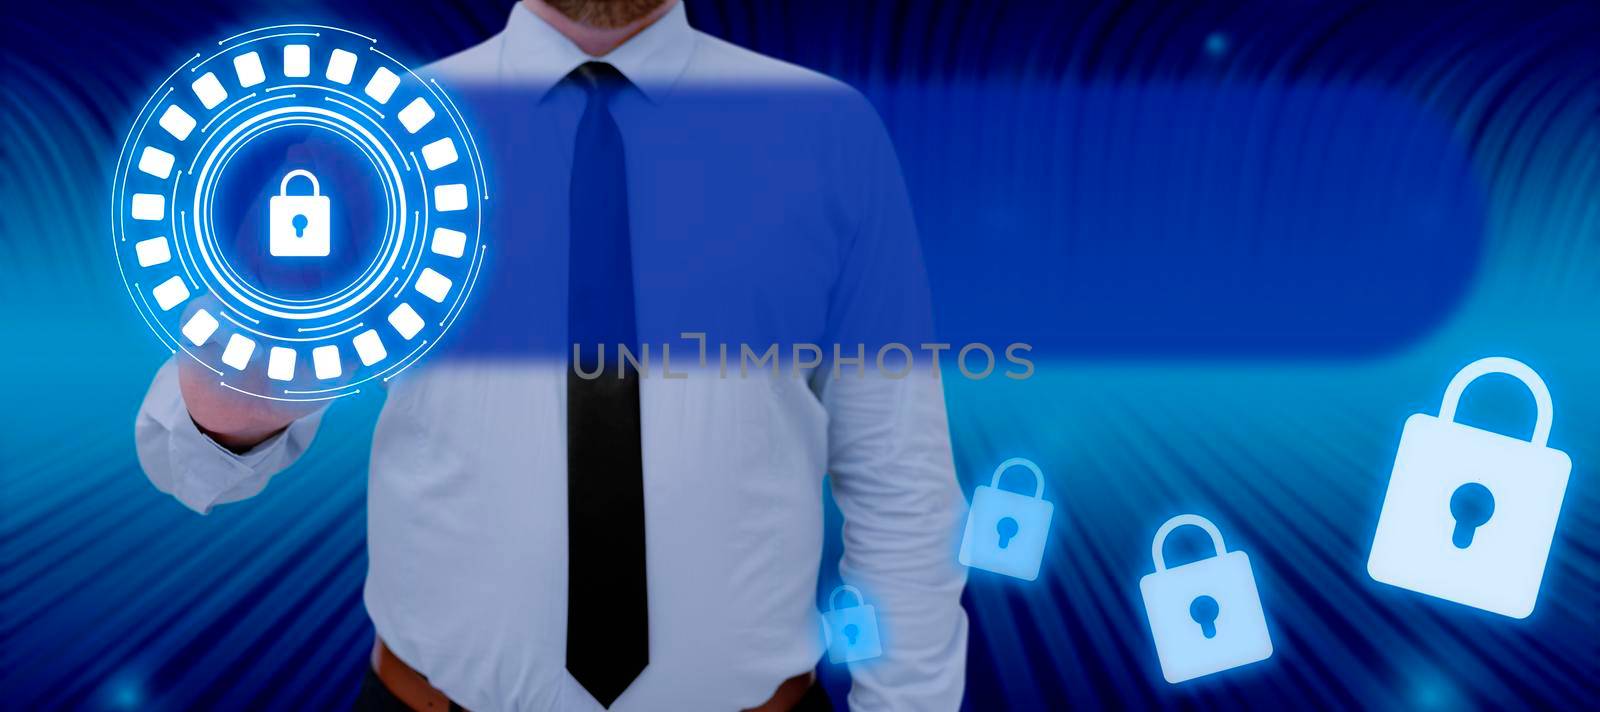 Businessman Pointing Hand And Showing Lock Sign For Data Privacy And Messages In An Abstract Design. Man With A Necktie Displaying The Lock To Secure Crucial Information. by nialowwa